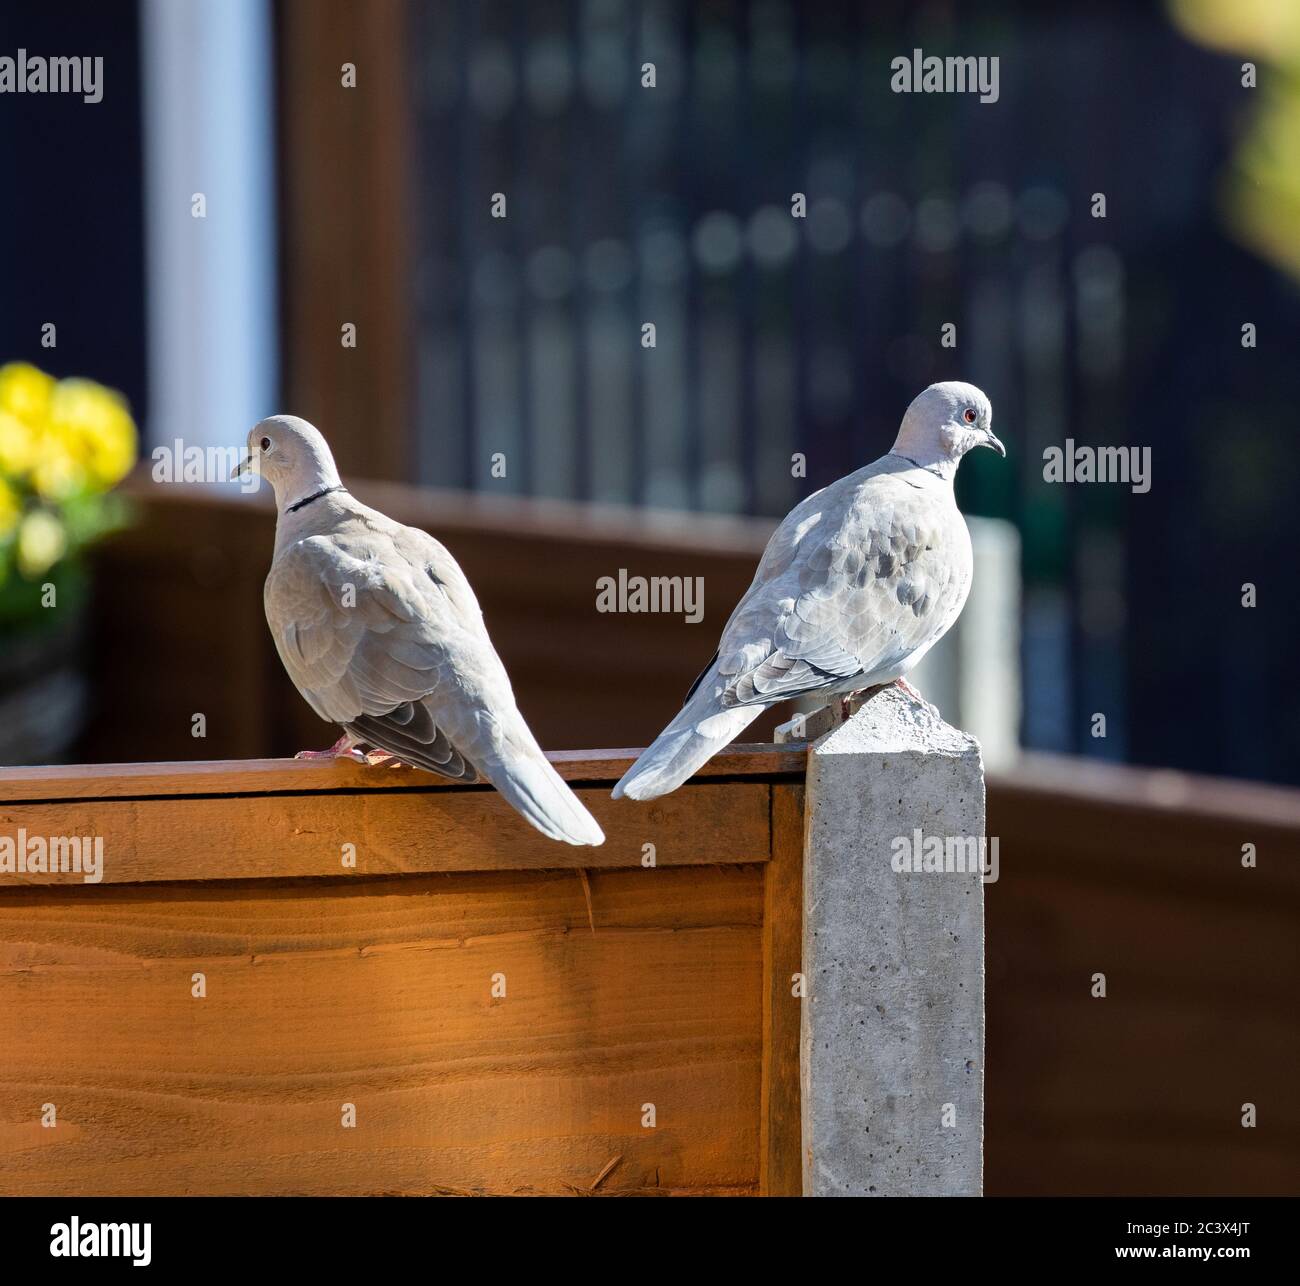 Biggin Hill,Kent,UK,22nd June 2020,Two Eurasion Collared Doves sit on a  garden fence while enjoying the early evening sunshine. The Eurasian  collared dove is a dove species originally native to Asia, which has